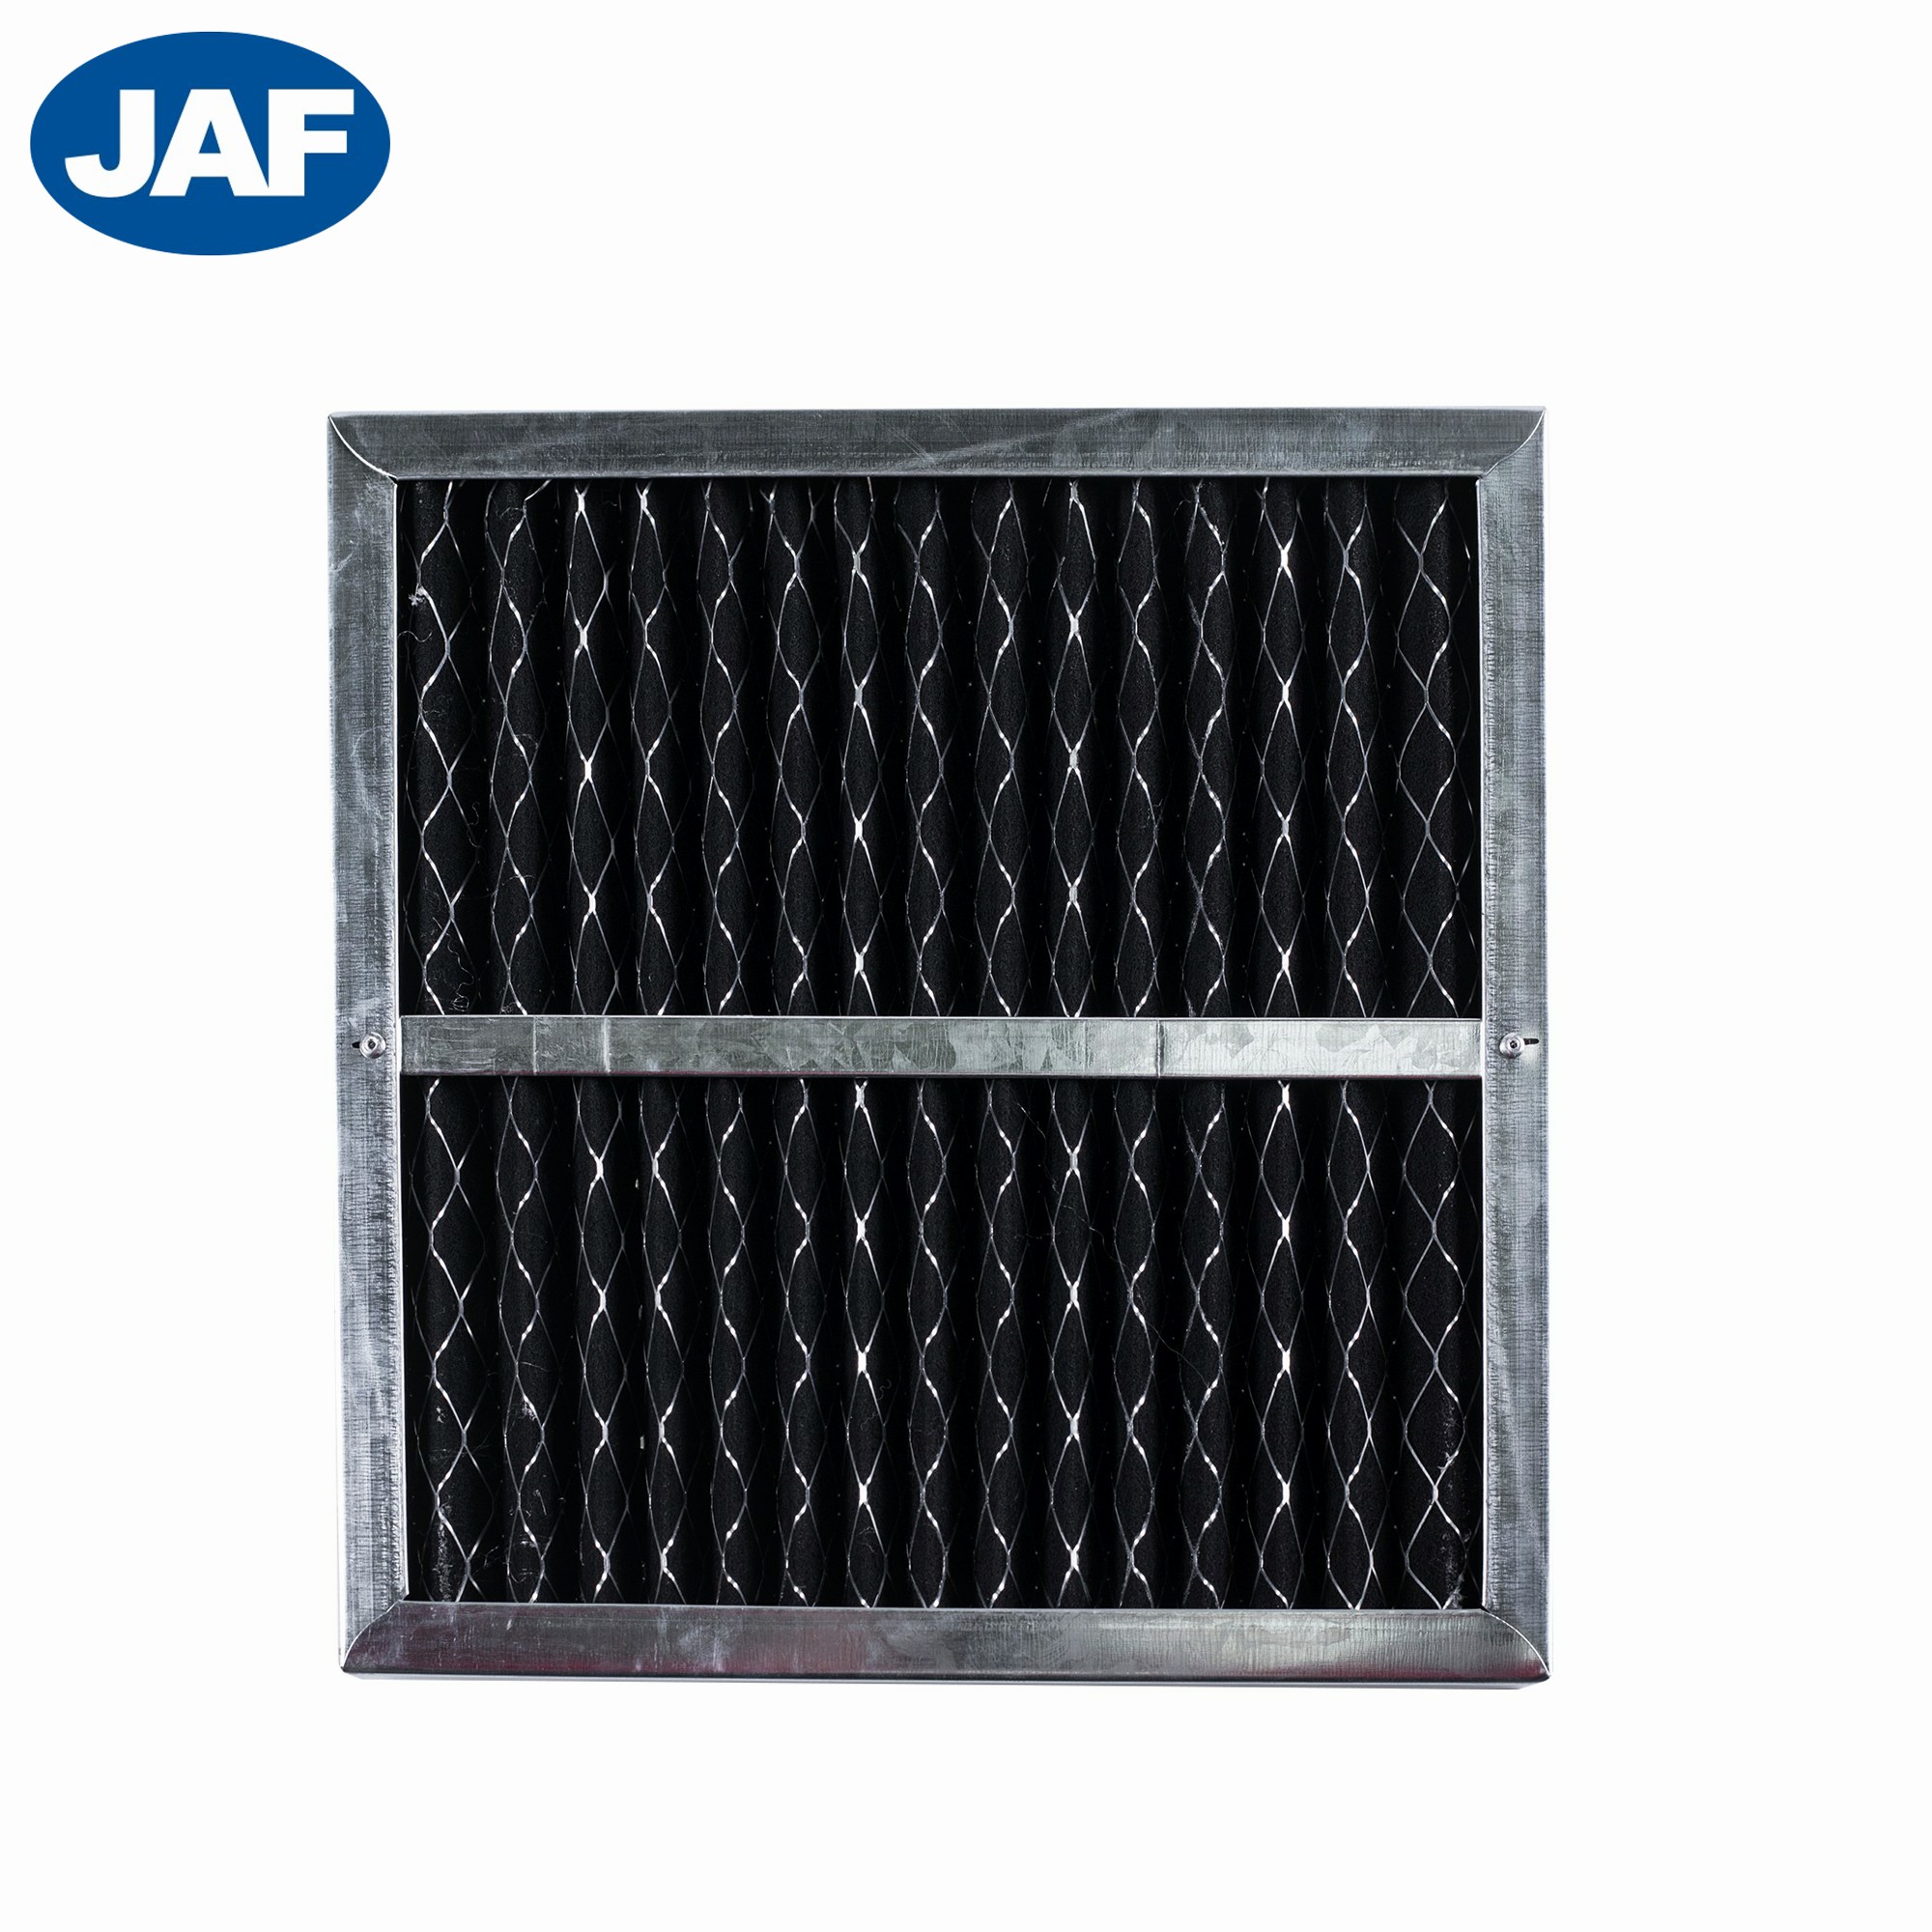 Activated carbon filter air purifier for air conditioner